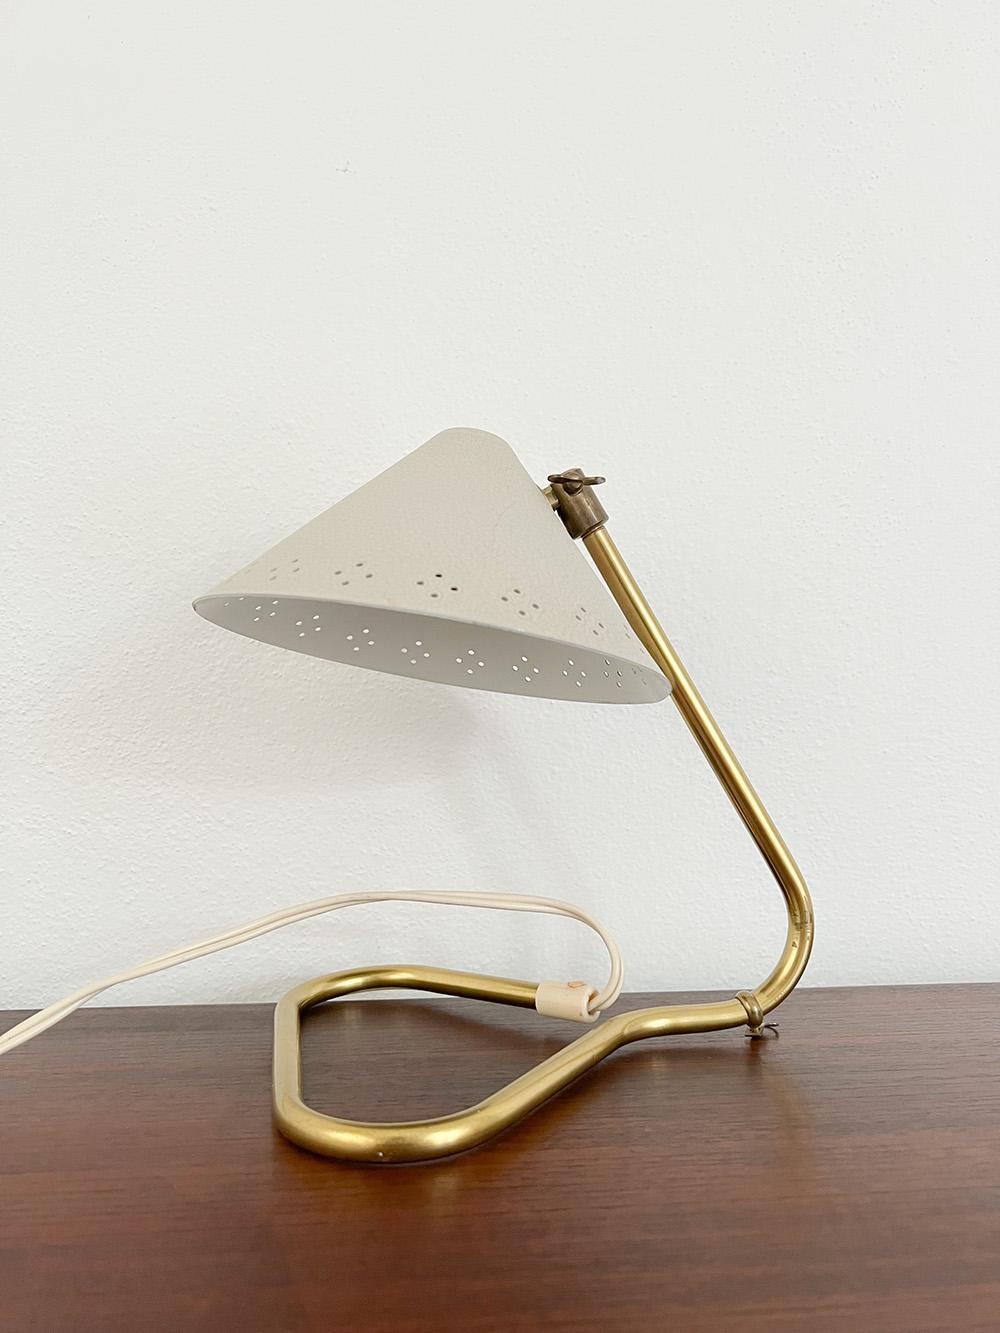 White lacquered aluminum and brass table lamp, model GK14, designed by Erik Wärnå and manufactured by Gnosjö Konstsmide in Sweden, 1950s.

This rare and beautifully designed table lamp of Swedish origin was designed by Erik Wärnå and manufactured